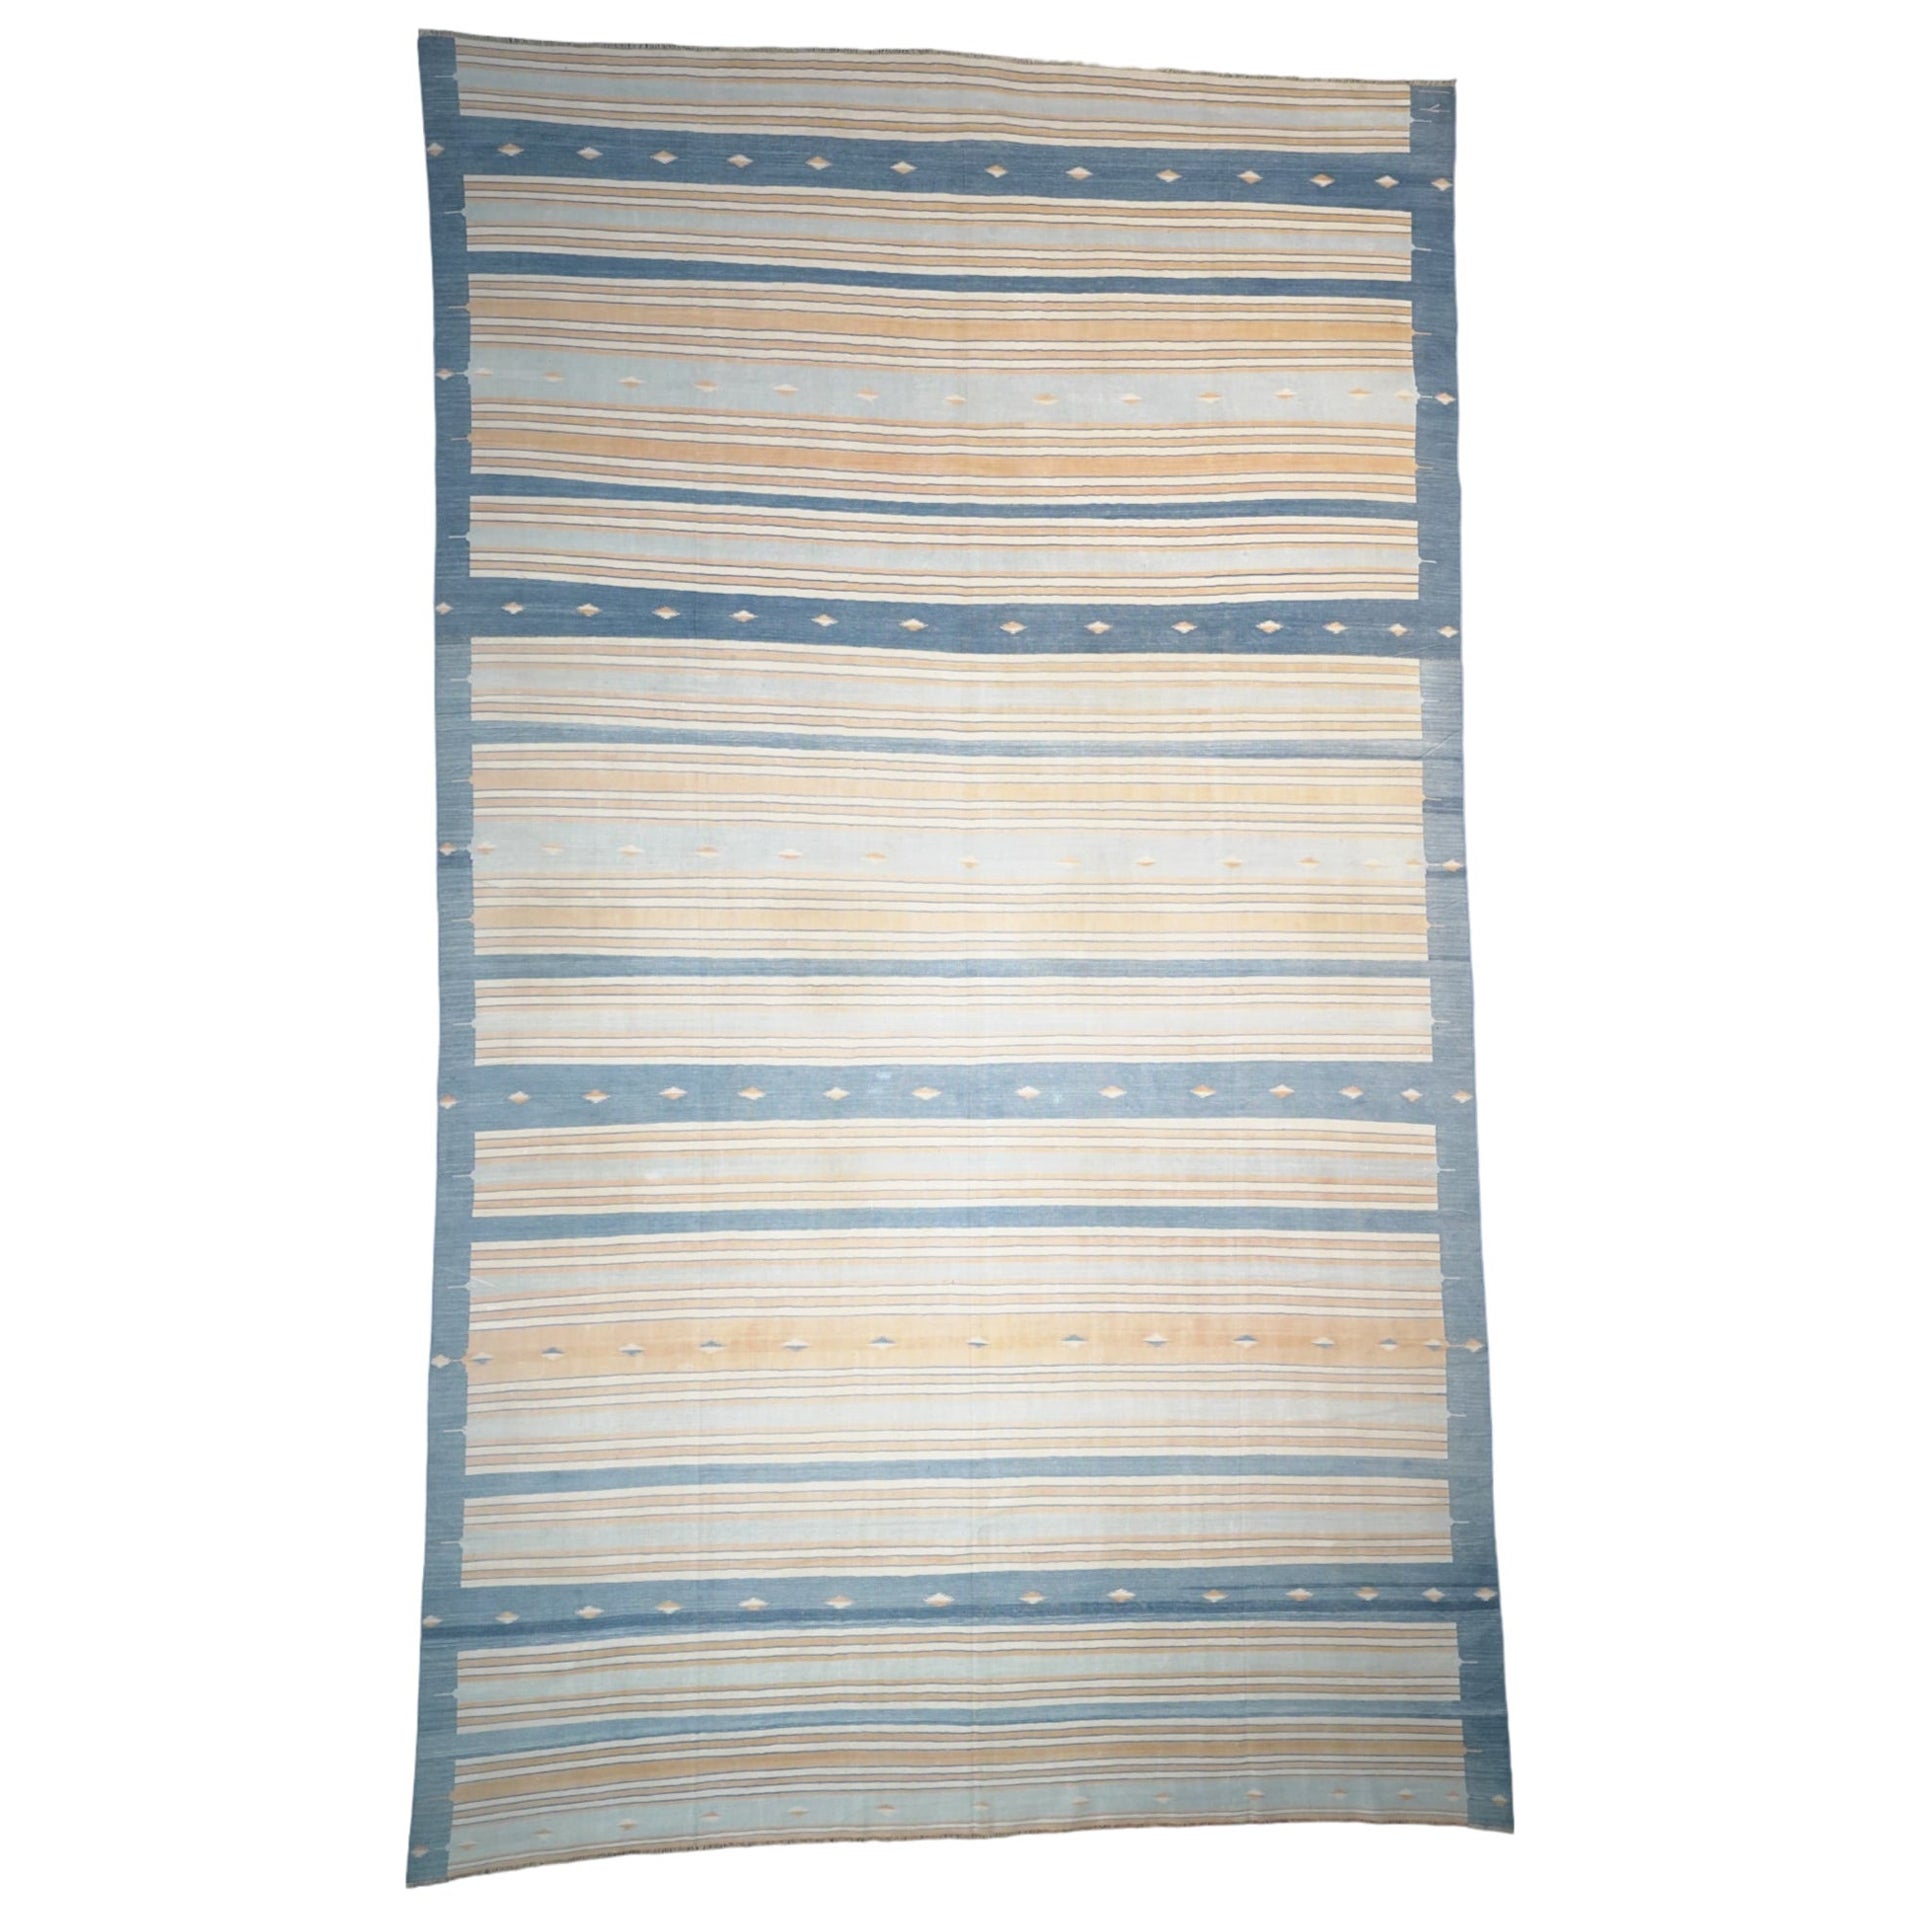 Vintage Dhurrie Rug in Bluewith Stripes, from Rug & Kilim For Sale